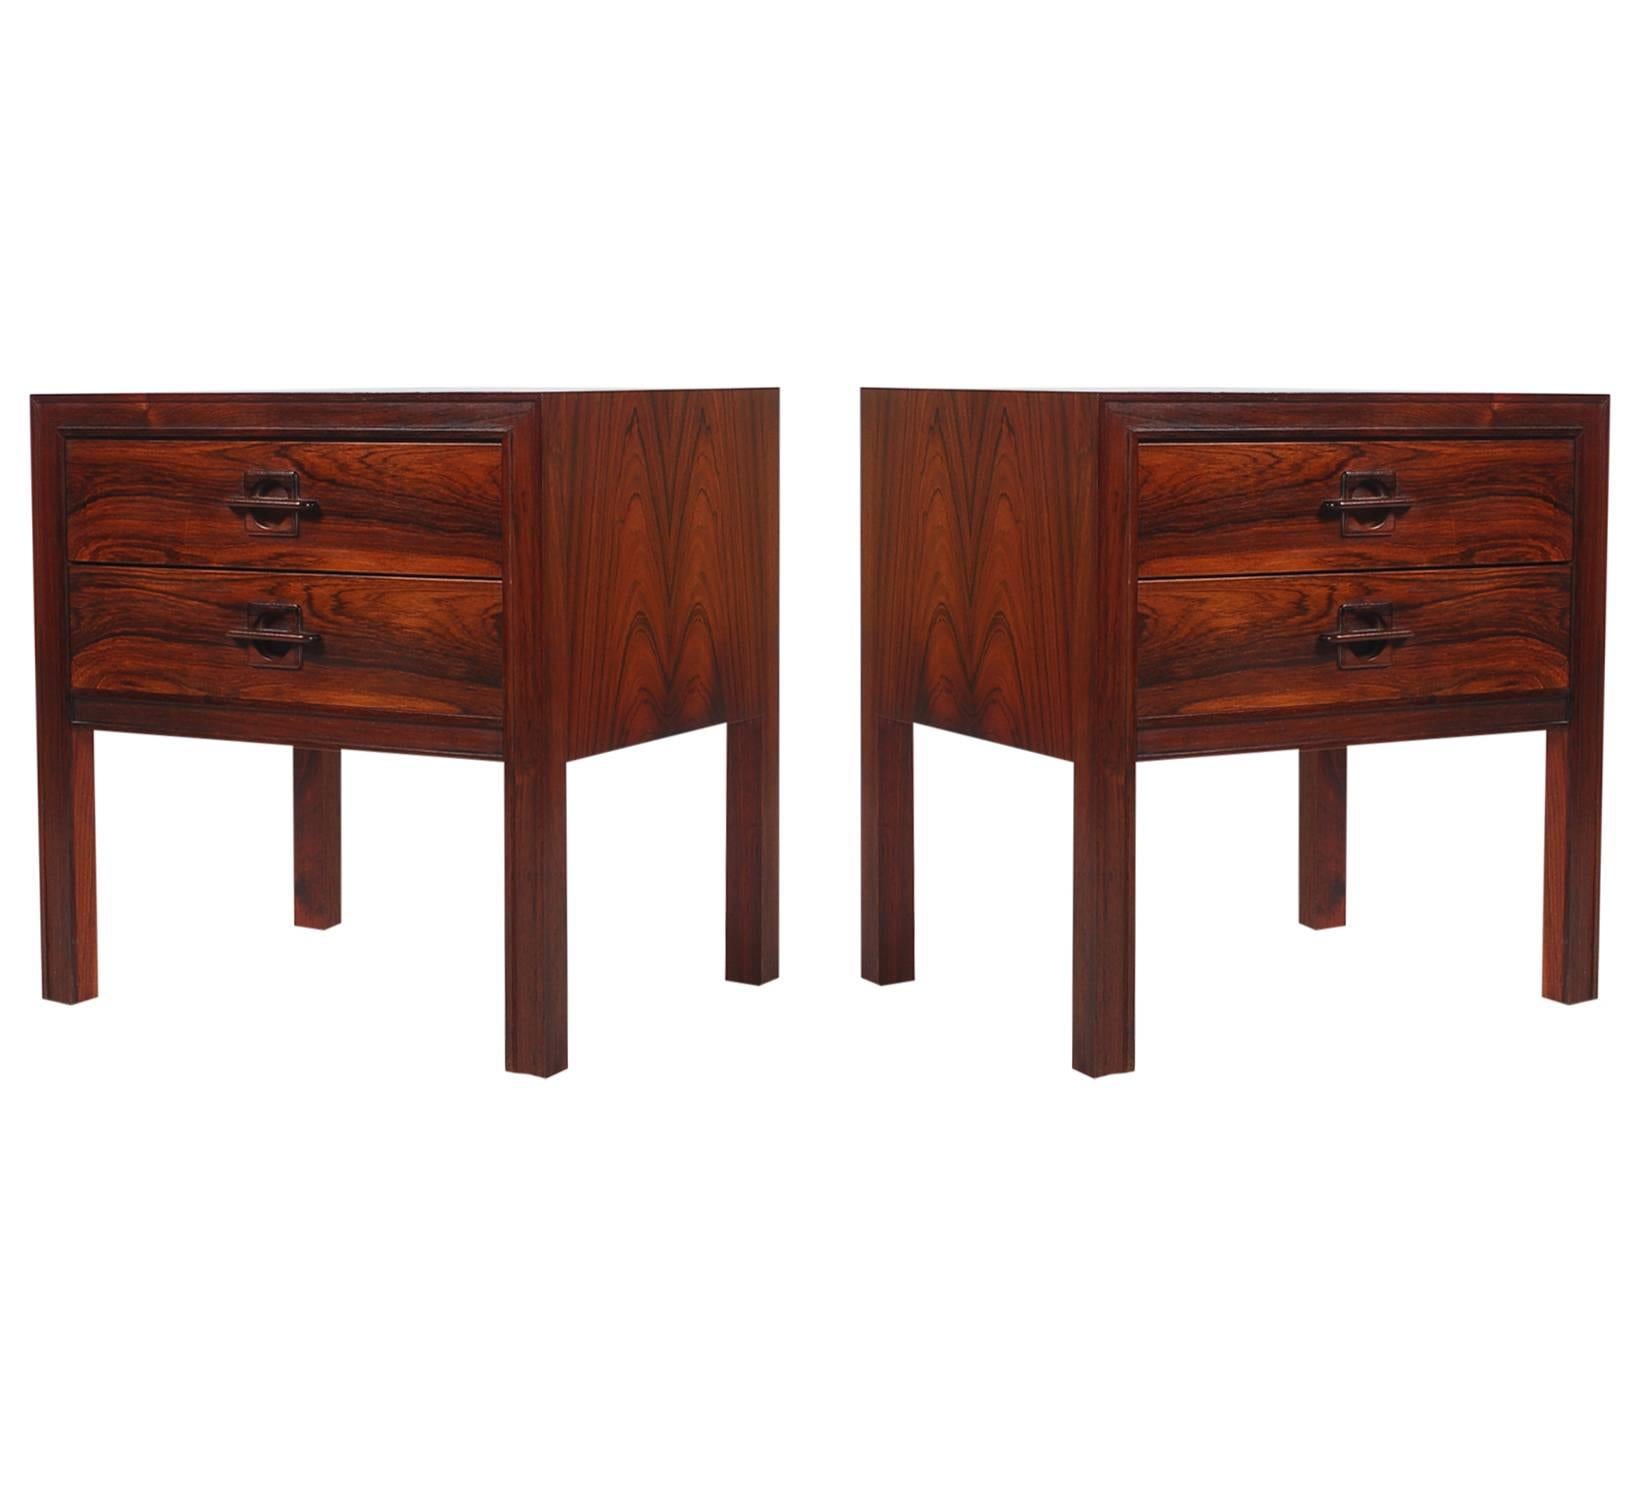 A beautiful matching pair of Danish modern night stands. They feature striking rosewood veneers and heavy solid construction.